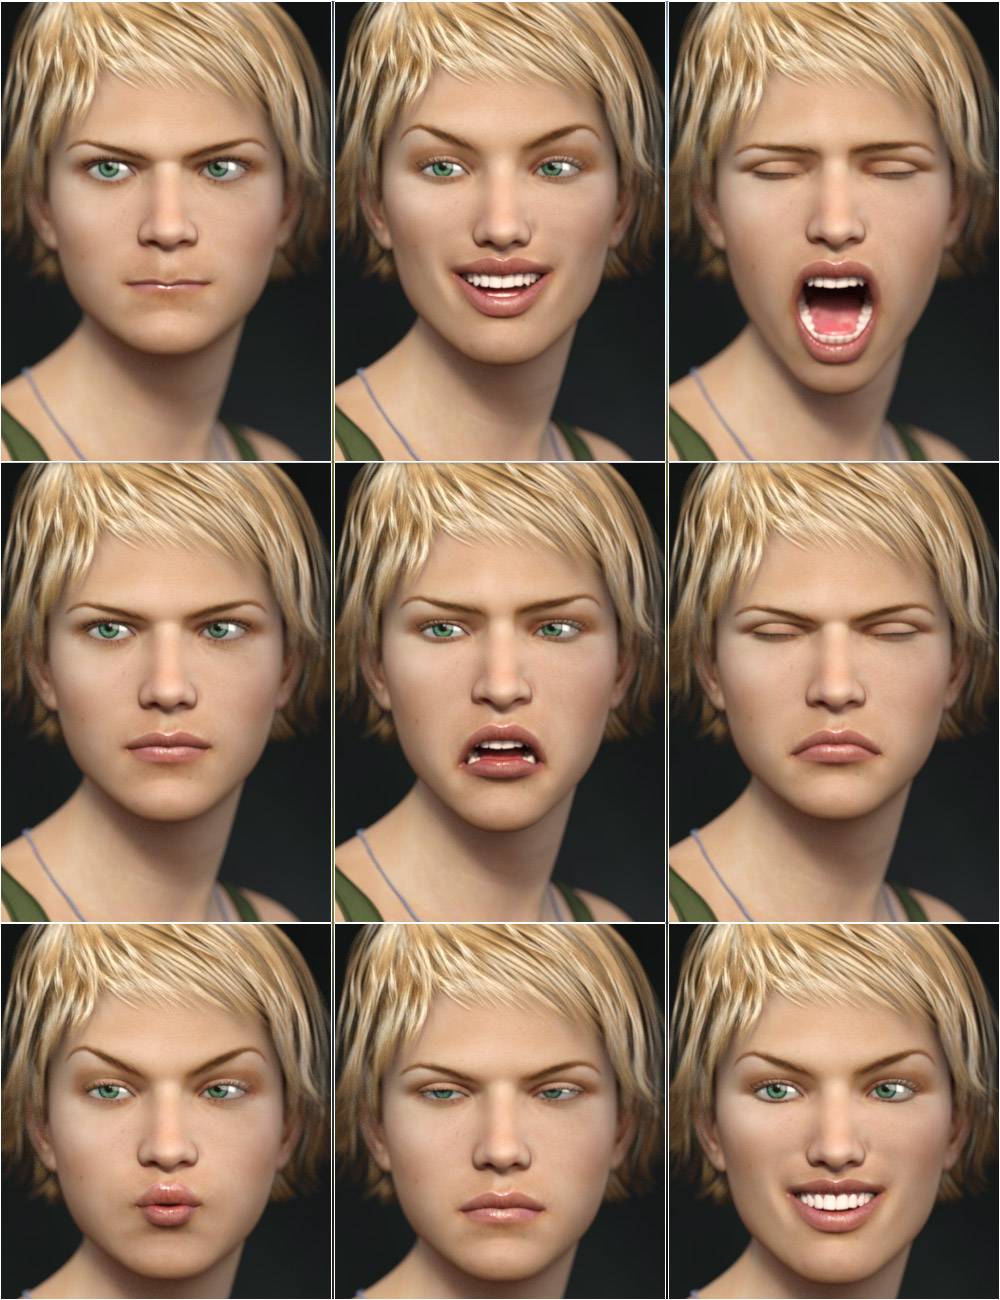 Private May Expressions for Genesis 3 Female(s)